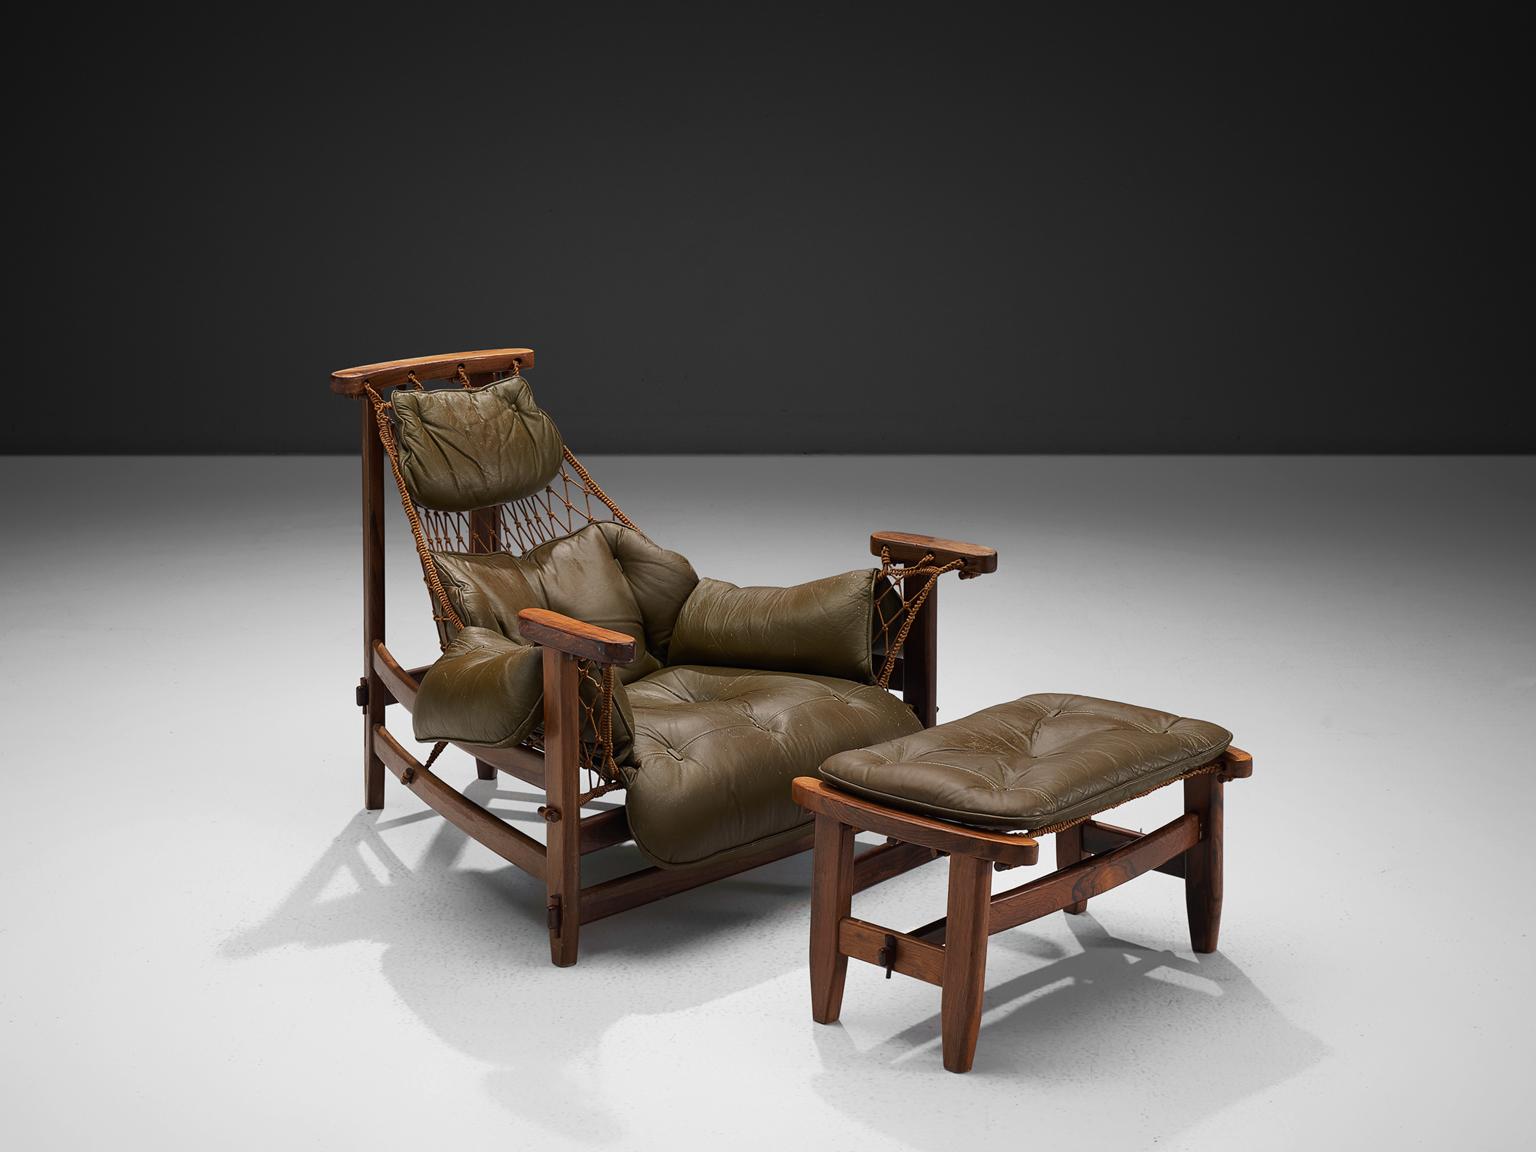 Jean Gillon, 'Jangada' armchair and ottoman, rosewood, nylon rope, leather, Brazil, 1968.

This robust and hefty armchair is designed by Jean Gillon. The originality of this Janganda comes from the concept of the body being captured by the piece